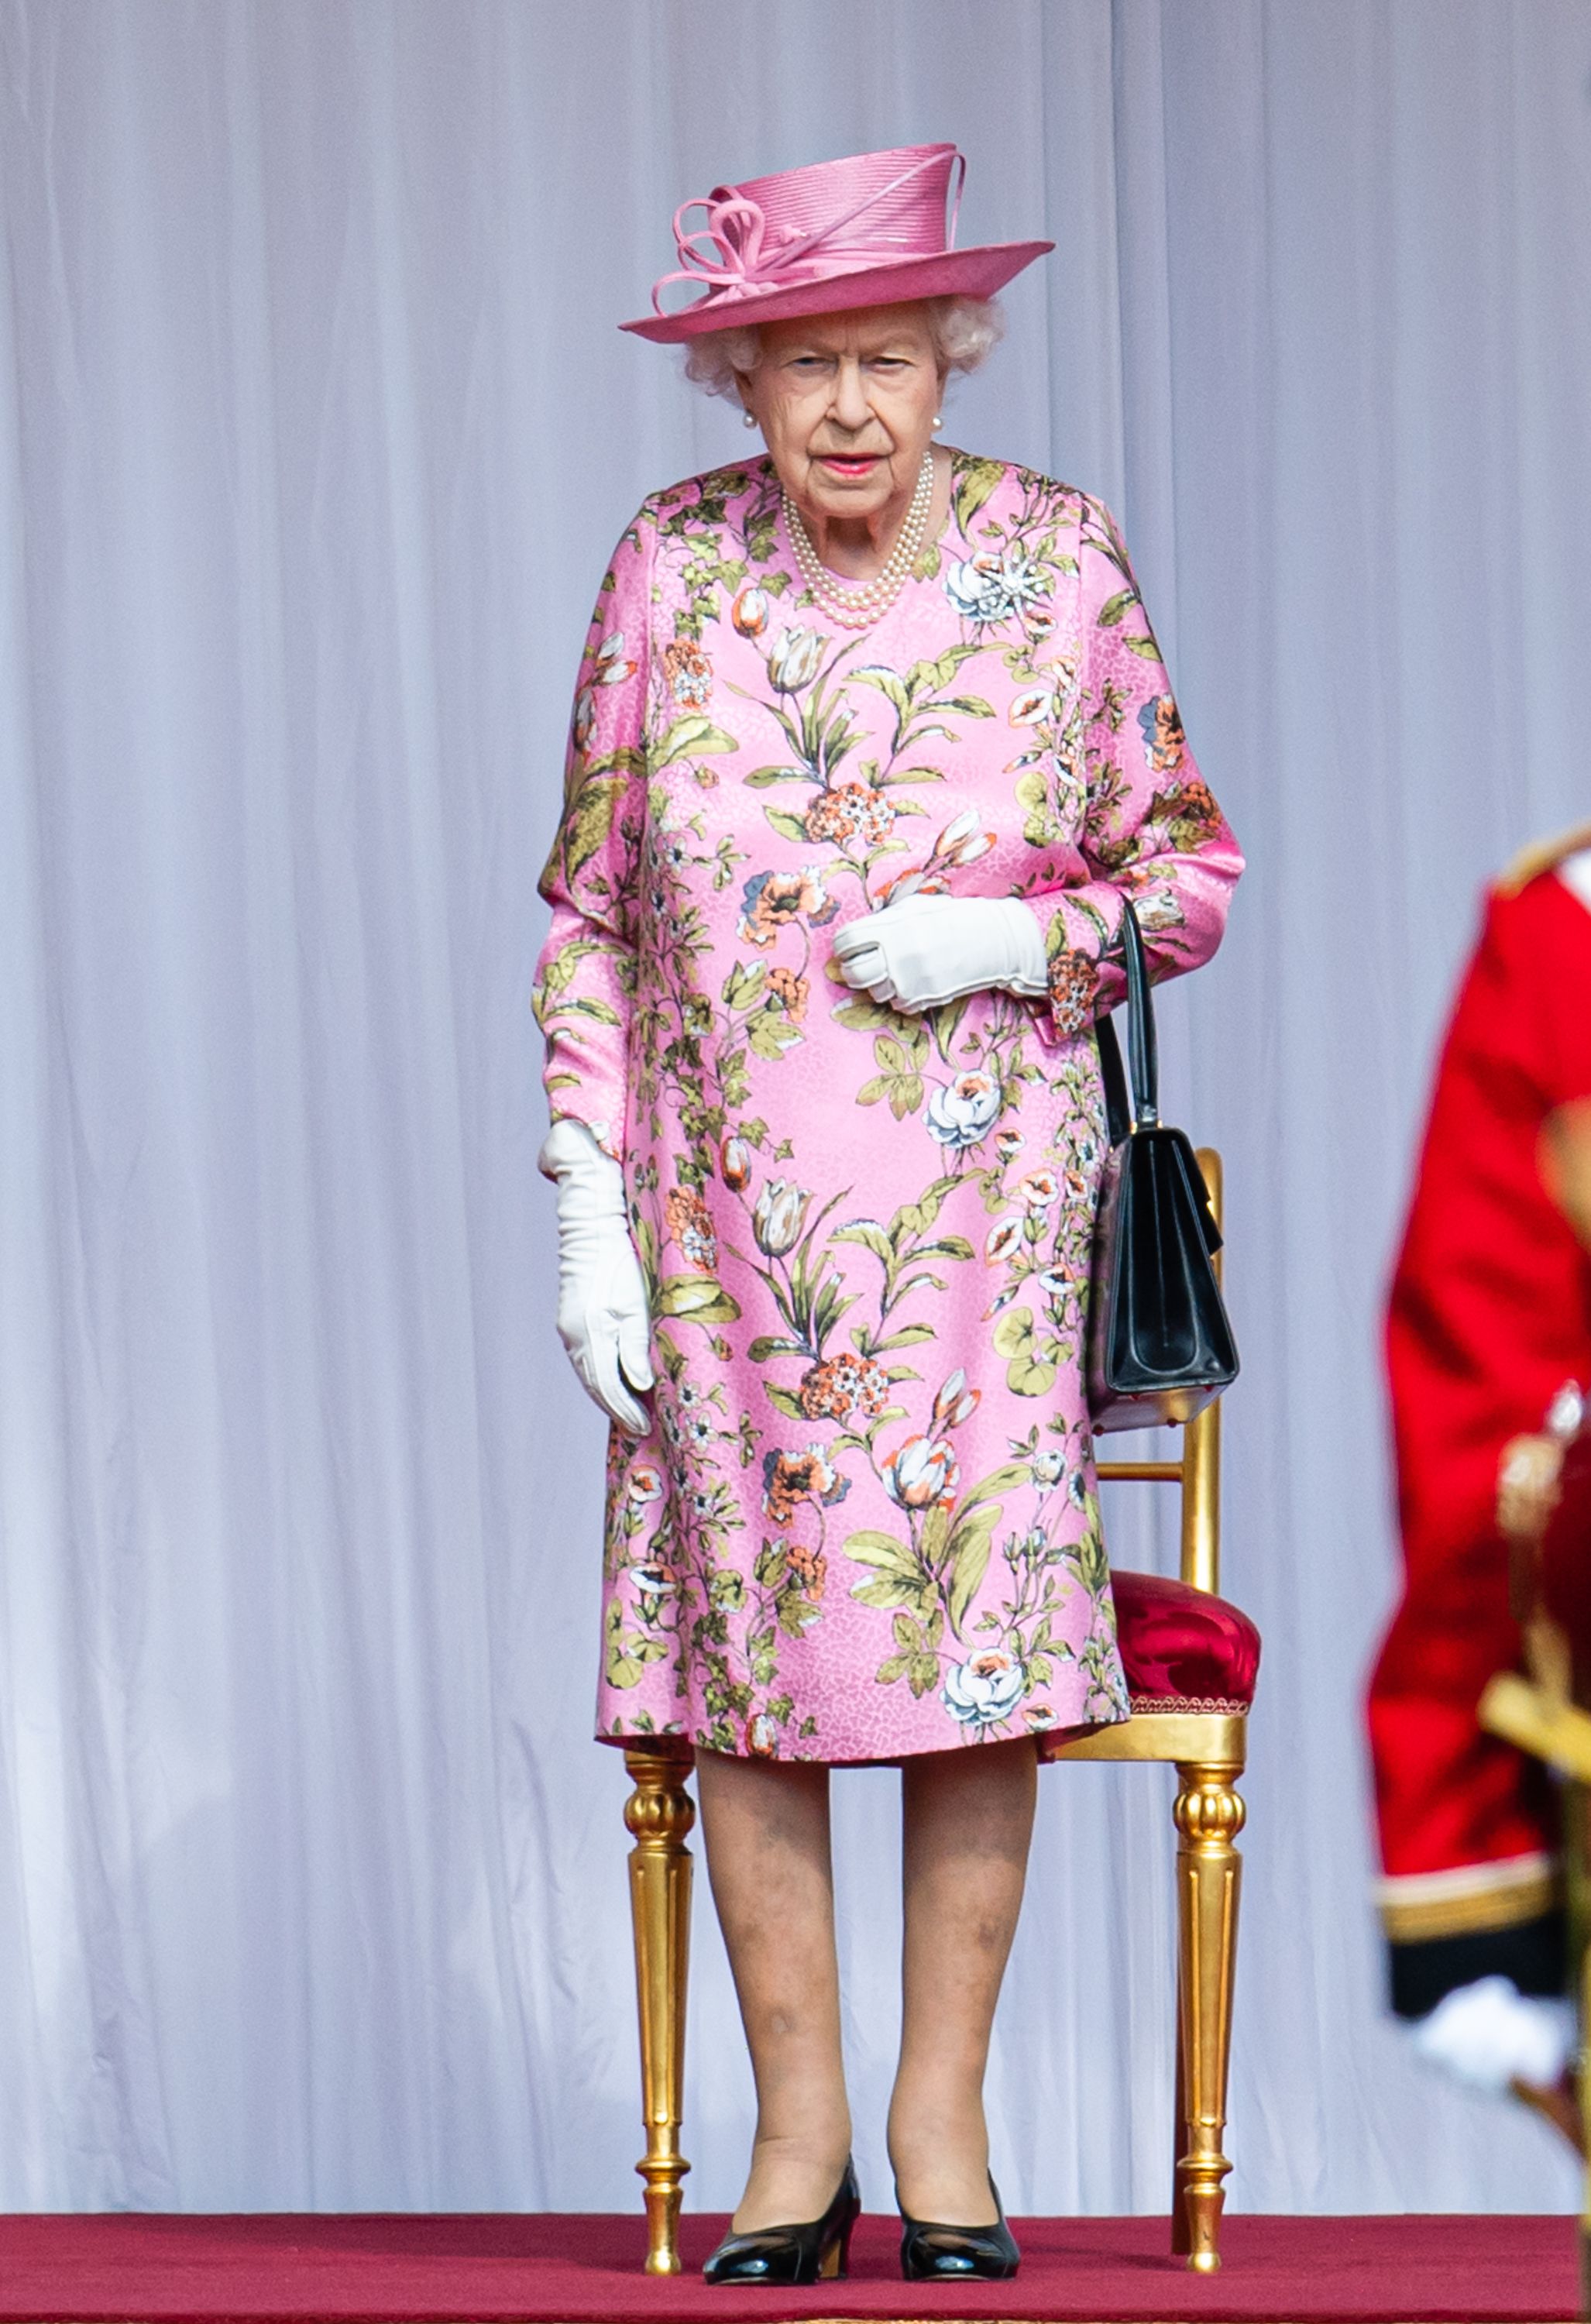 Queen Elizabeth's Best Fashion Looks - The Queen's Classic Outfits